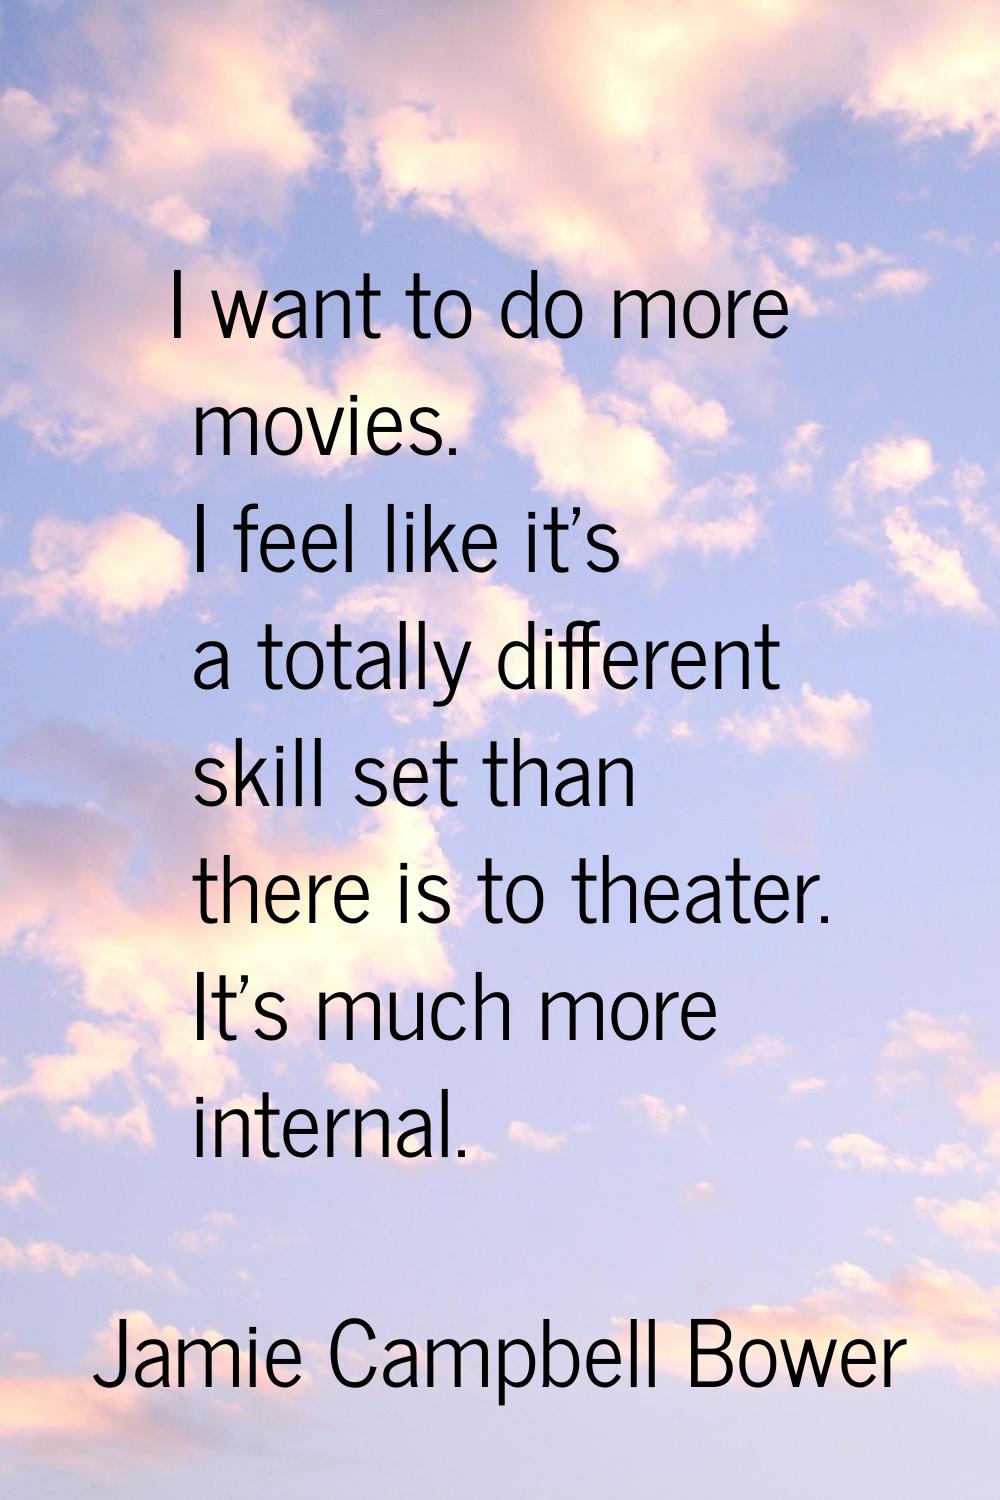 I want to do more movies. I feel like it's a totally different skill set than there is to theater. 